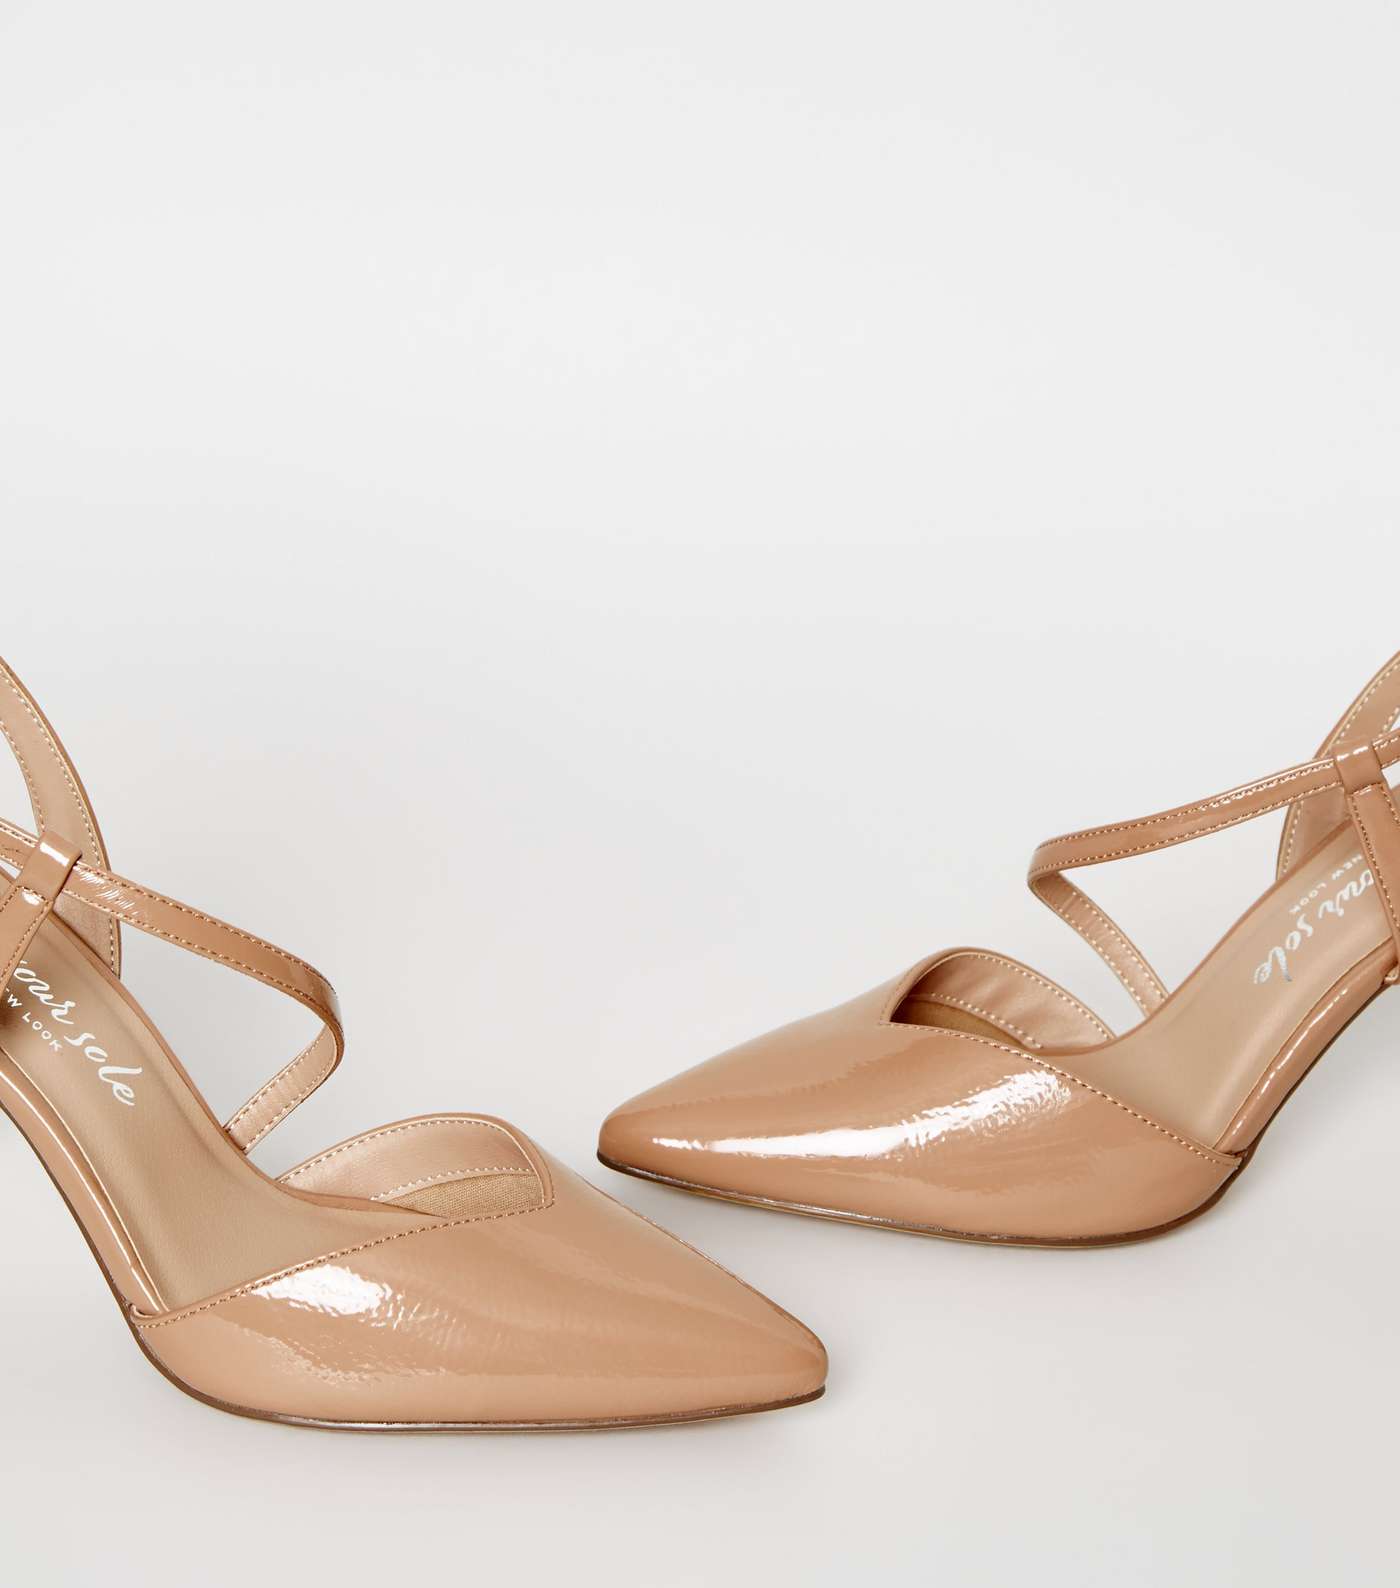 Camel Patent Strappy Pointed Stiletto Courts Image 3